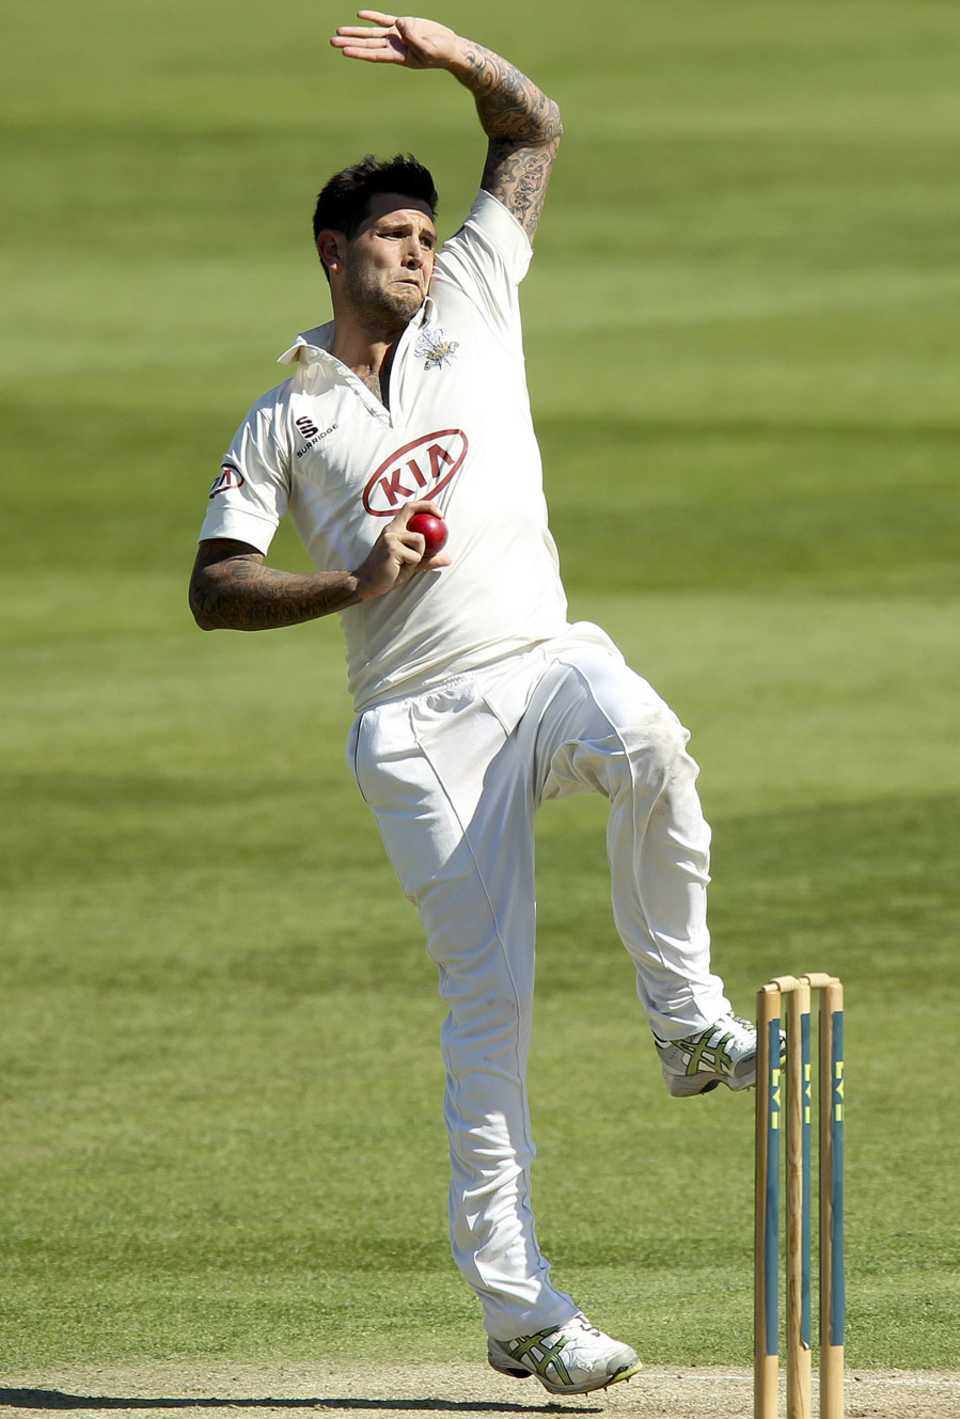 Jade Dernbach nipped out two wickets in two balls after tea